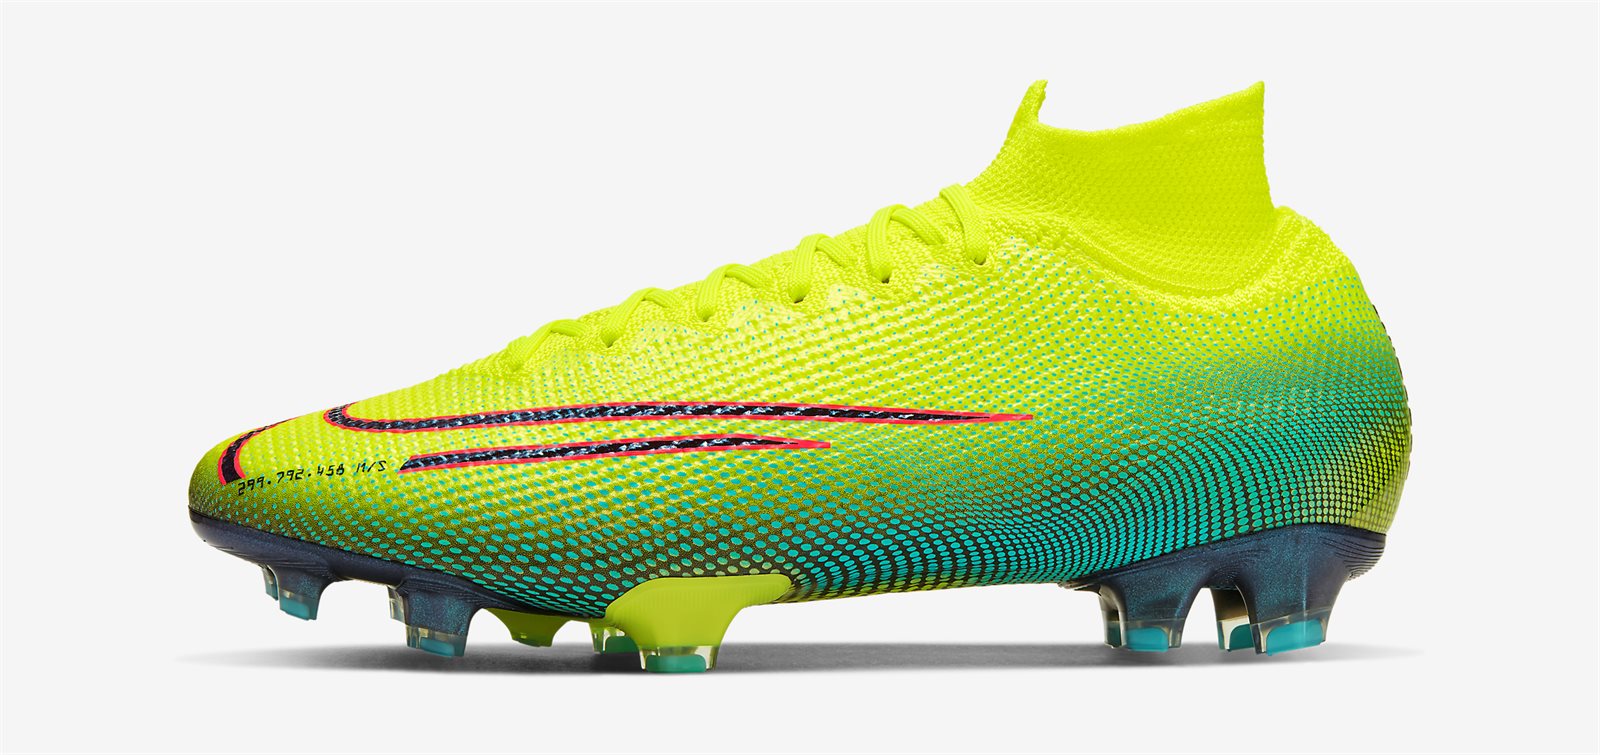 cr7 soccer cleats 2019